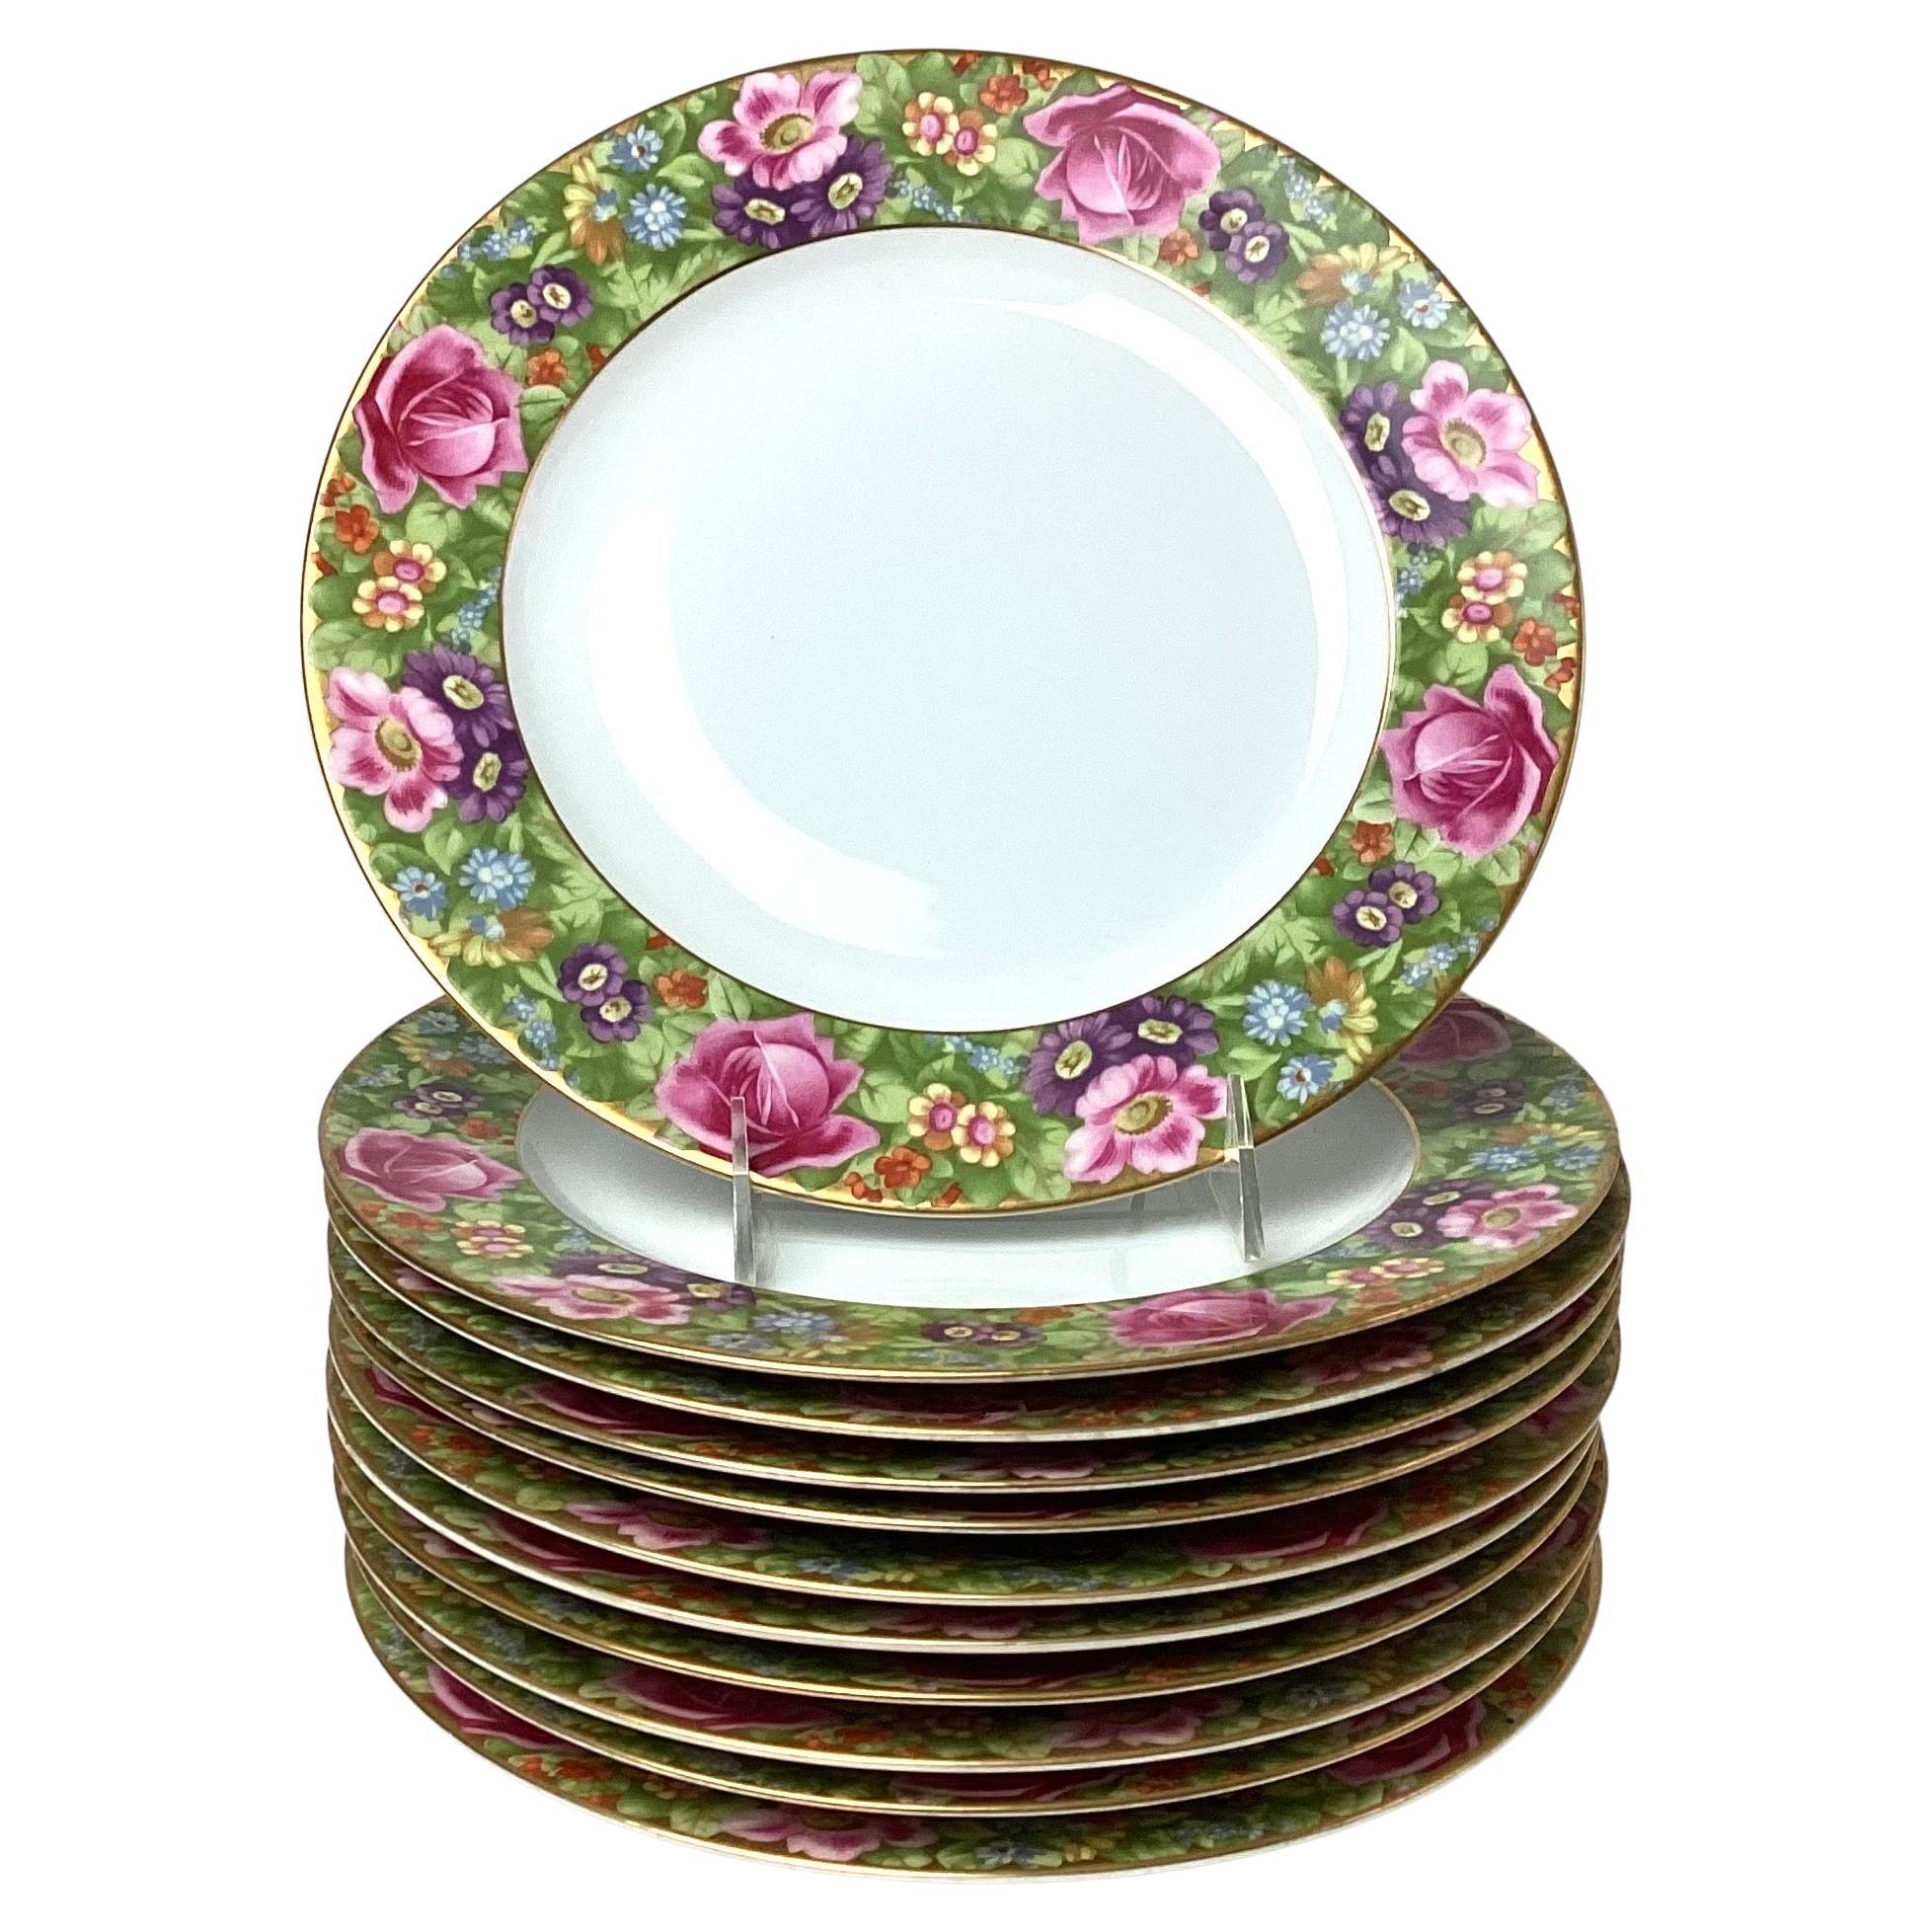 10 Rosenthal Bavaria Pink Rose Floral with Gold Decorative Edge Dinner Plates For Sale